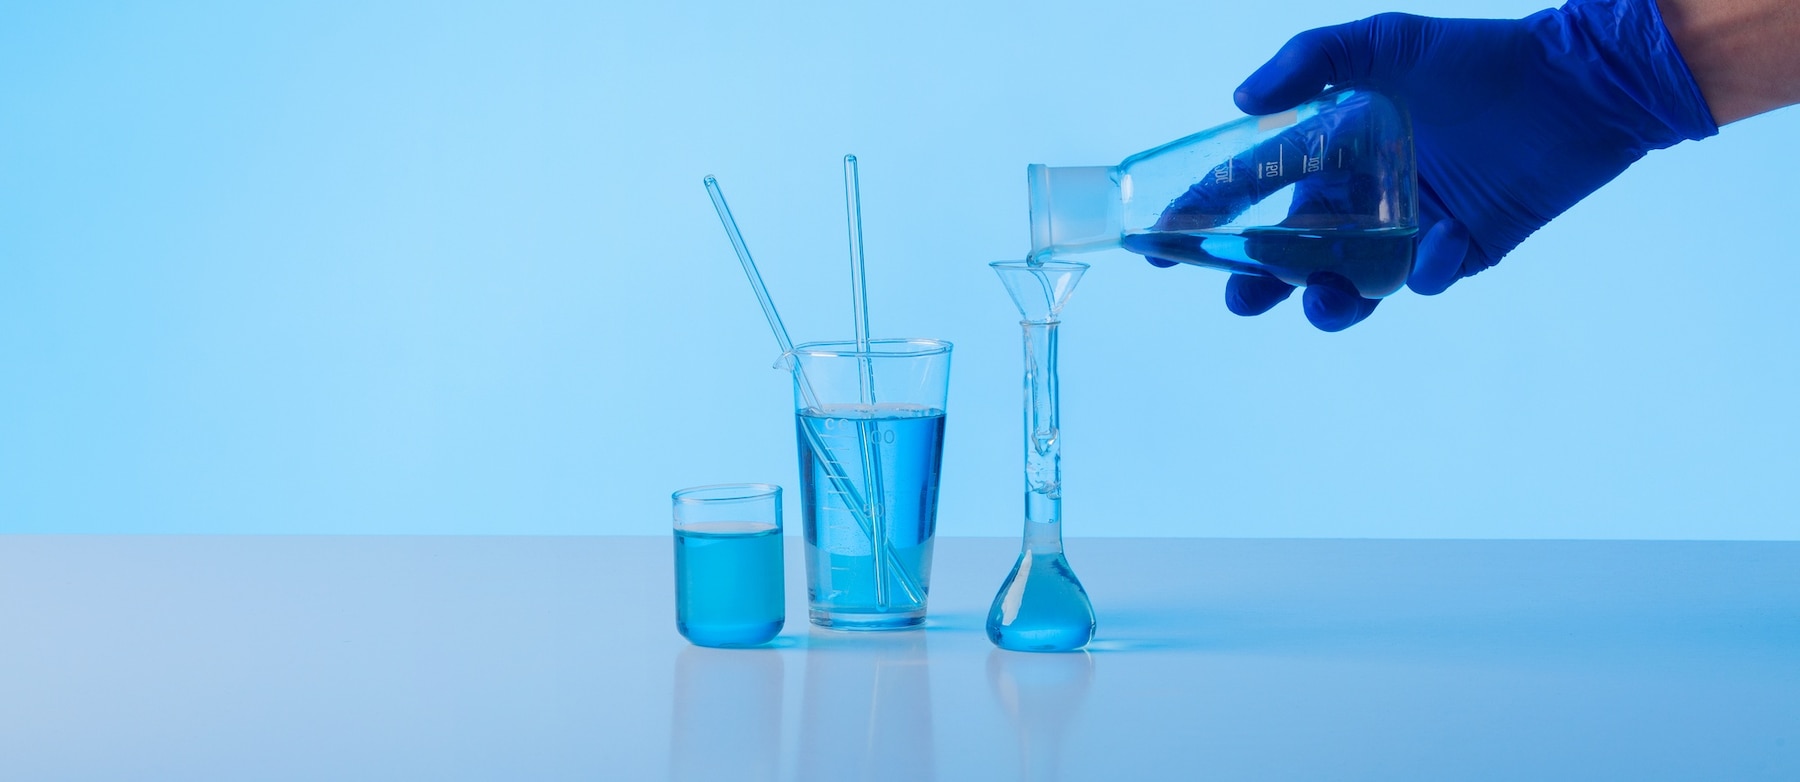 scientist-pouring-substance-side-view_23-2149731481.jpg